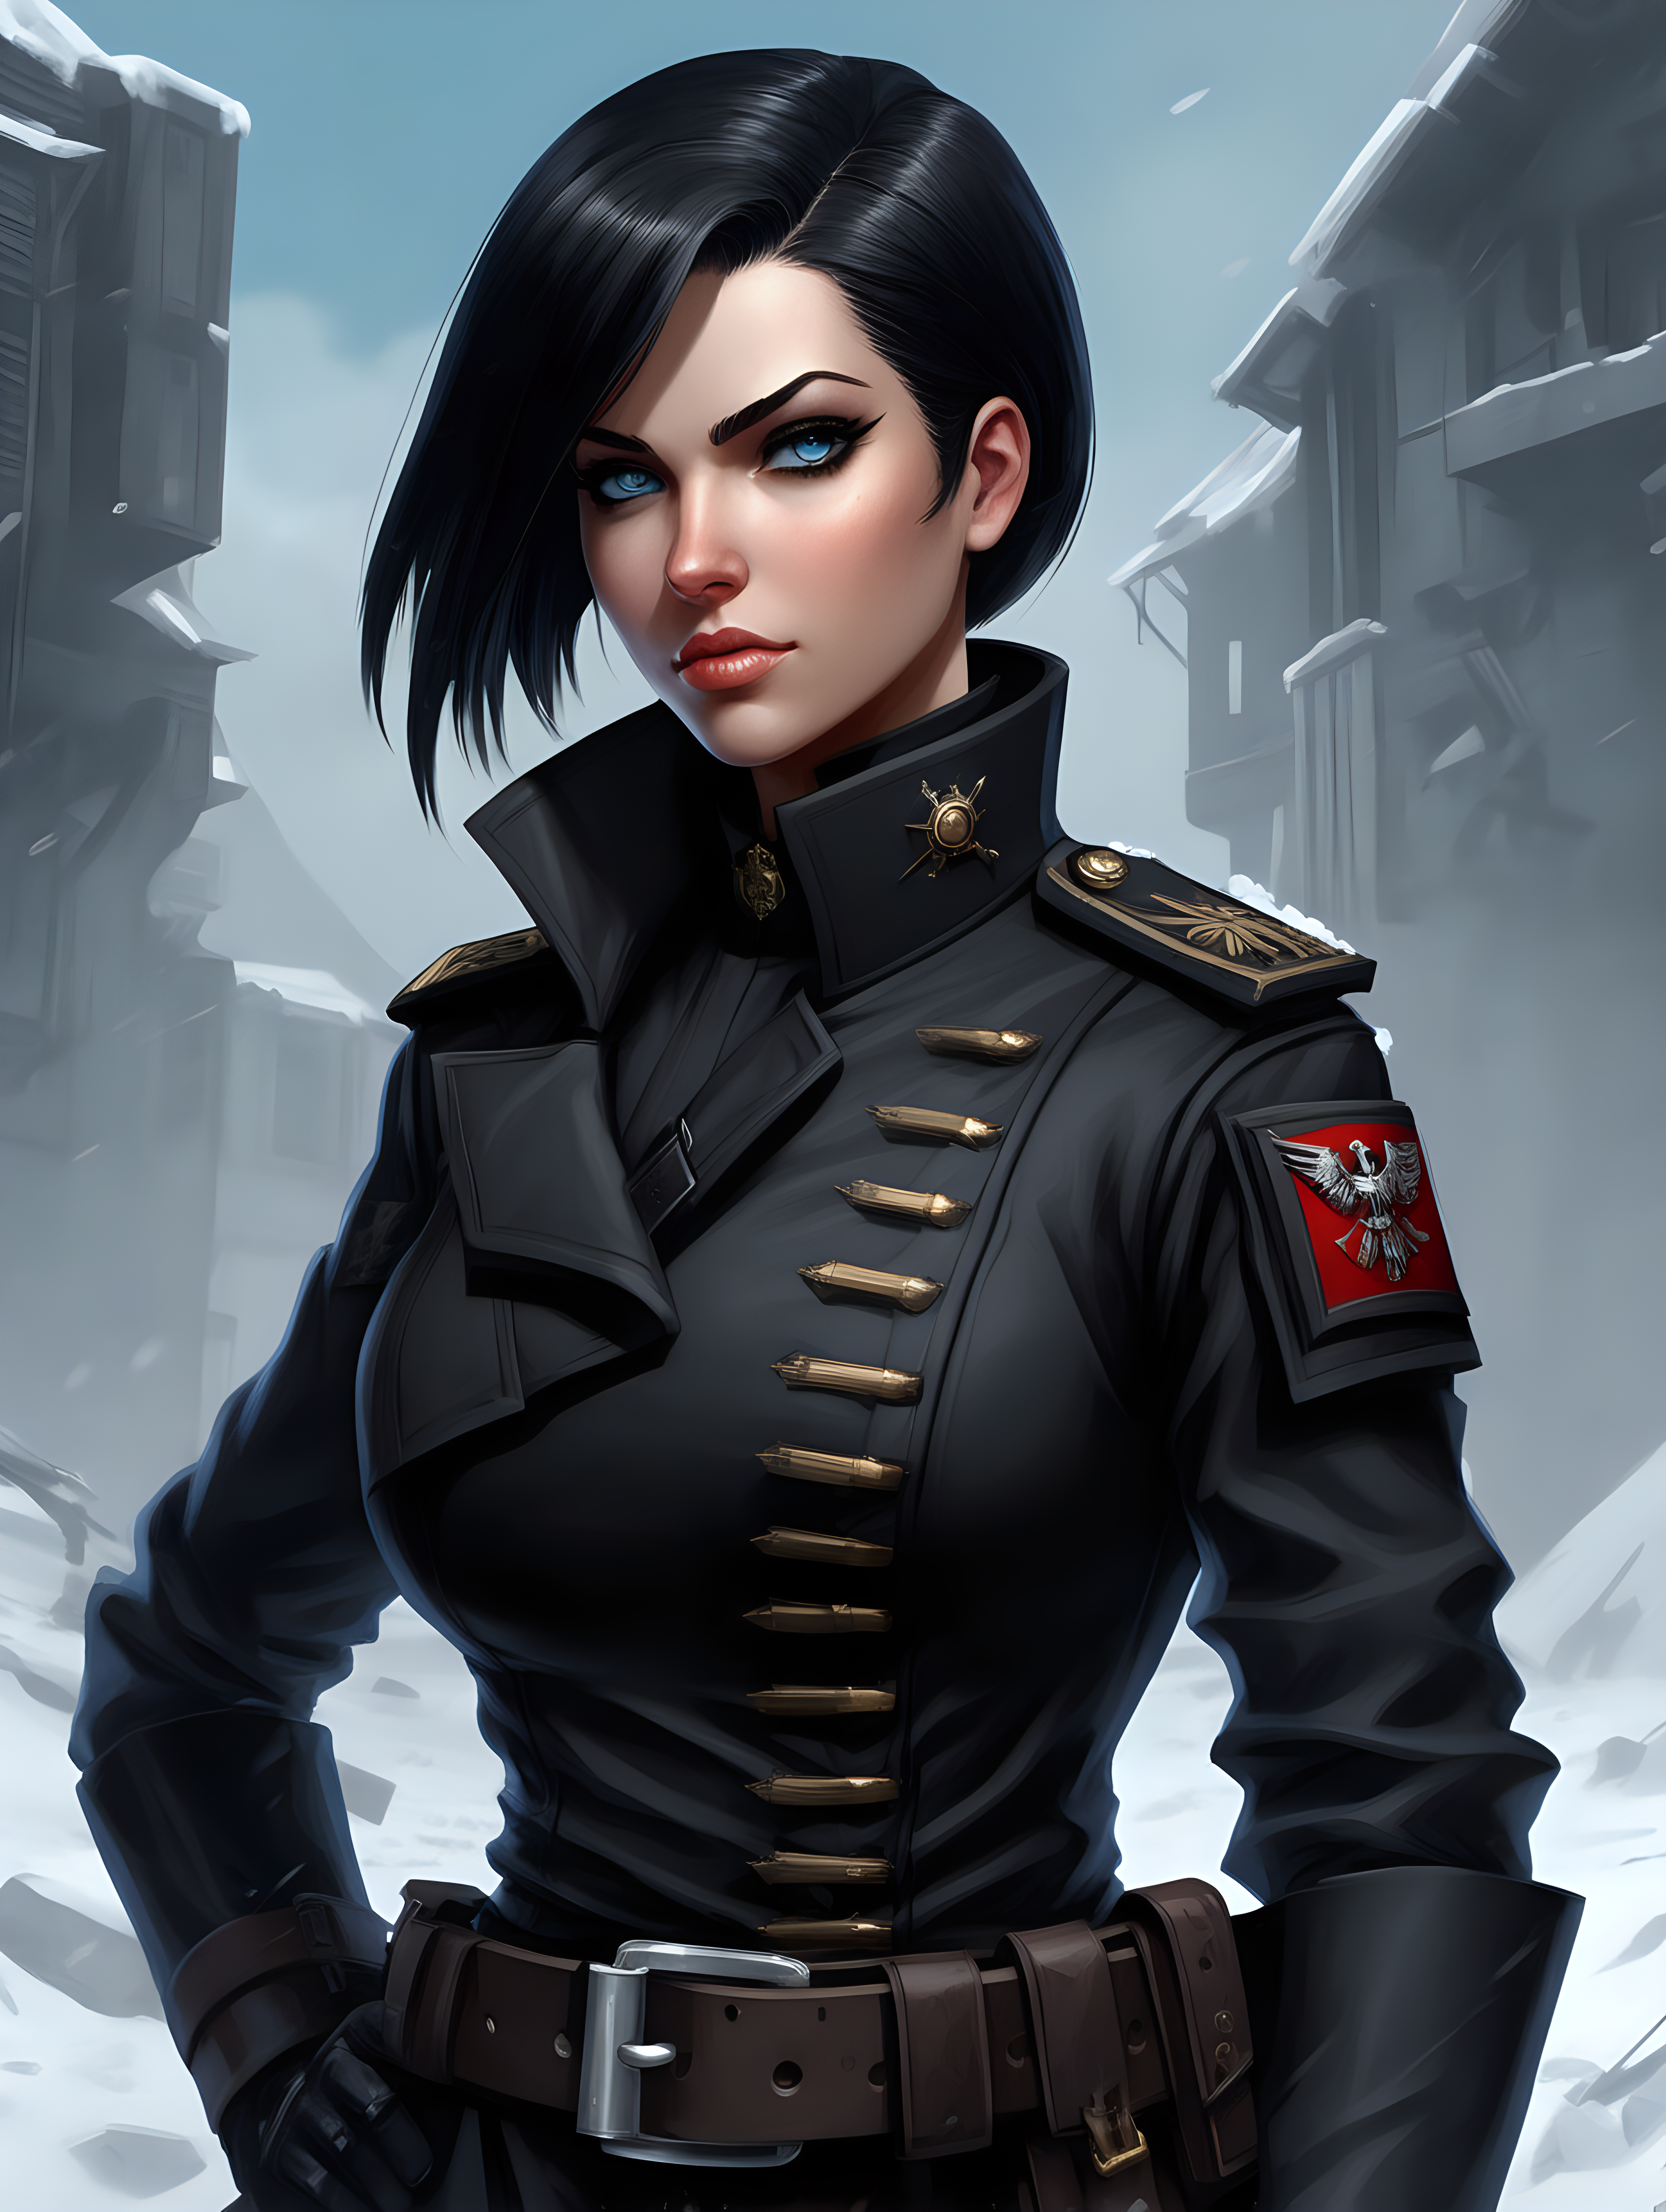 Warhammer 40K young Commissar woman. She has an hourglass shape. She has raven black hair. She has a very short hair style similar to what Maya, from Borderlands 2, has. Dark black uniform. Dark brown belt has a lot of pouches, grenades, and a black holster attached. Dark brown bandolier around waist. Her dark black uniform jacket fits perfectly and is closed up. She has a lot of eye shadow. Background scene is snowy trench line. She has icy blue eyes. 